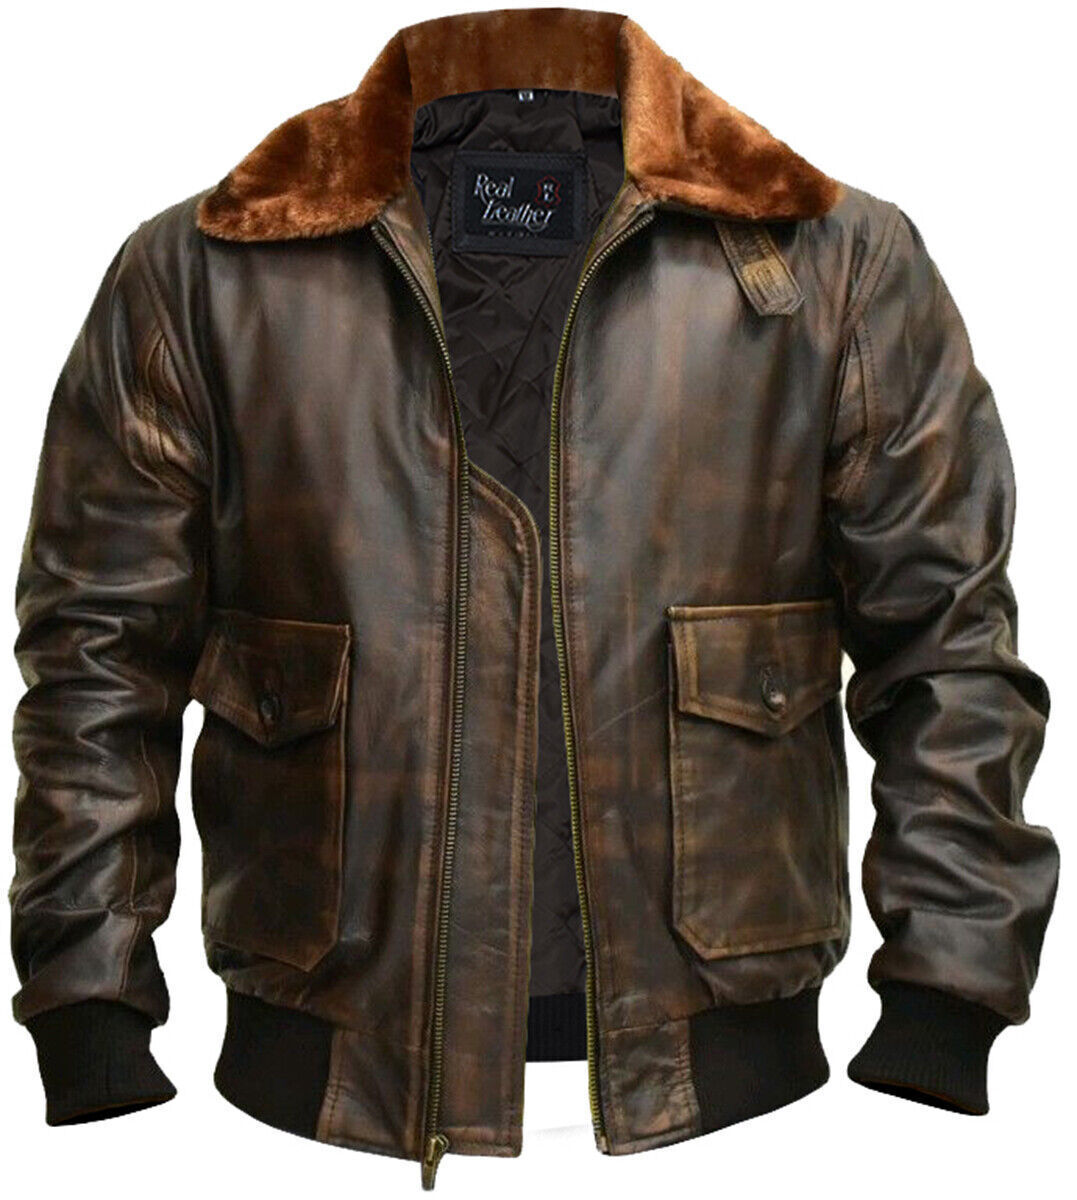 G-1 Aviator A-2 Real Bomber Flight Jacket Distressed Brown Men's Leather Jacket